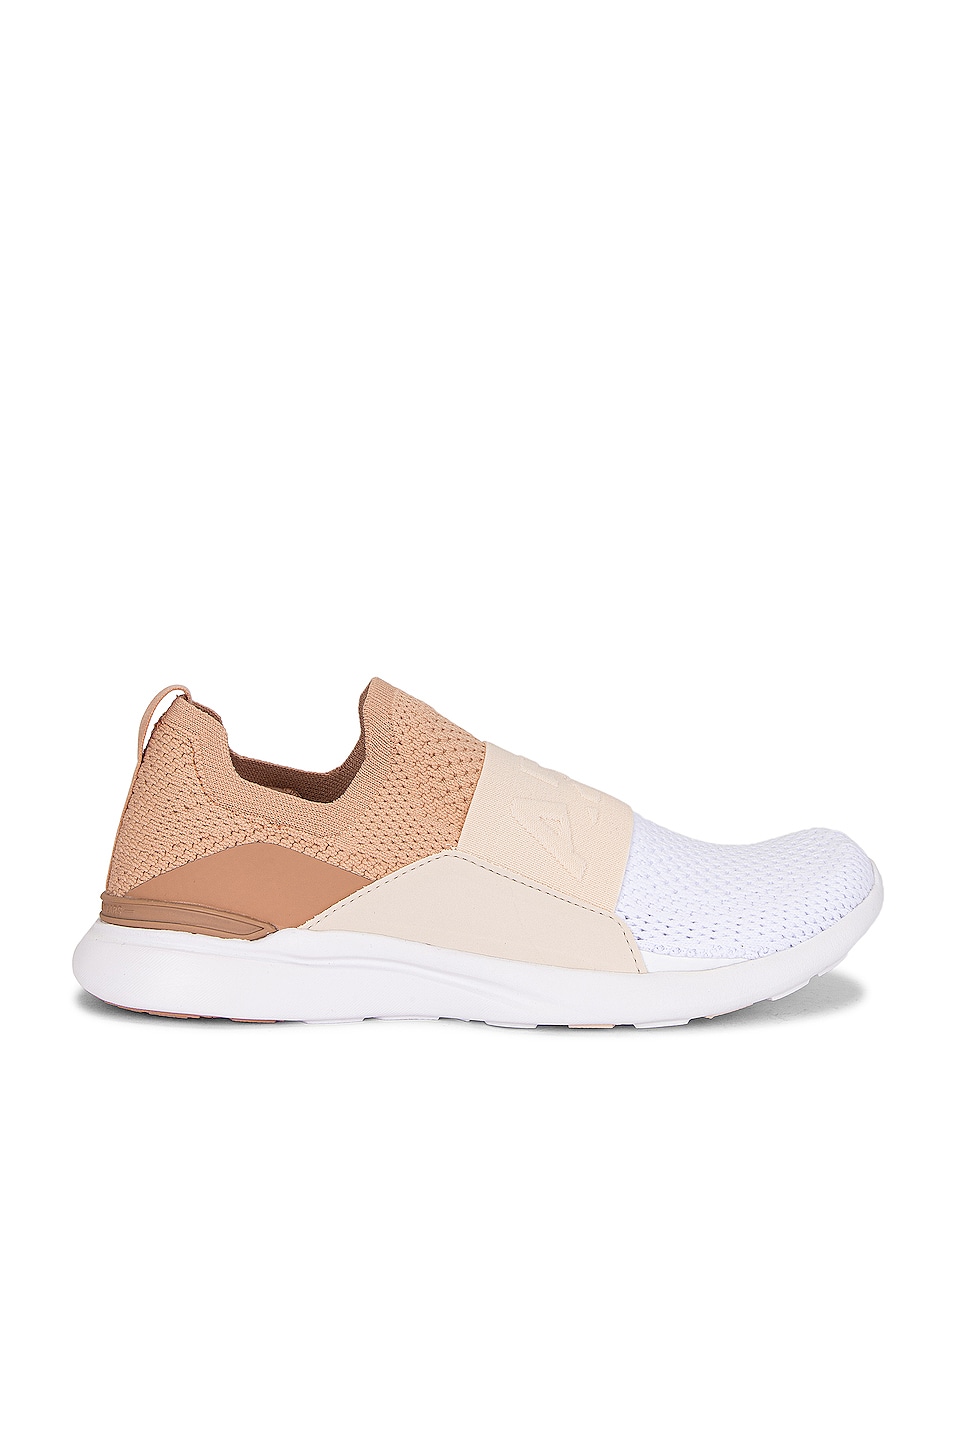 Image 1 of APL: Athletic Propulsion Labs TechLoom Bliss Sneaker in Caramel, Warm Silk, White